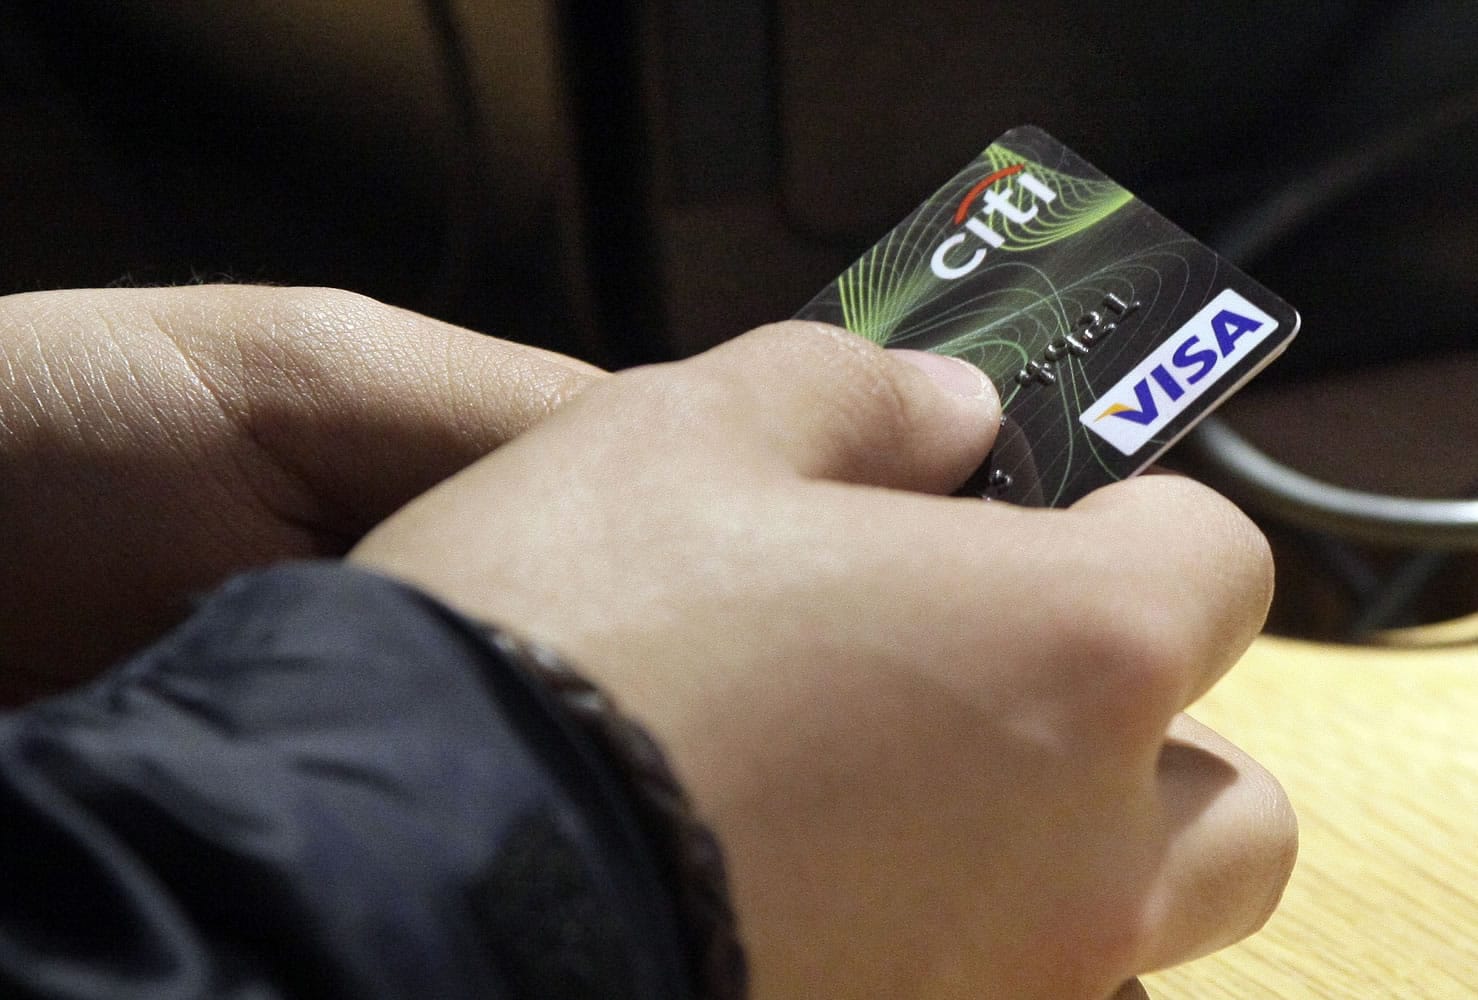 A Visa credit card is offered for payment at the opening of the Superdry store in New York's Times Square.